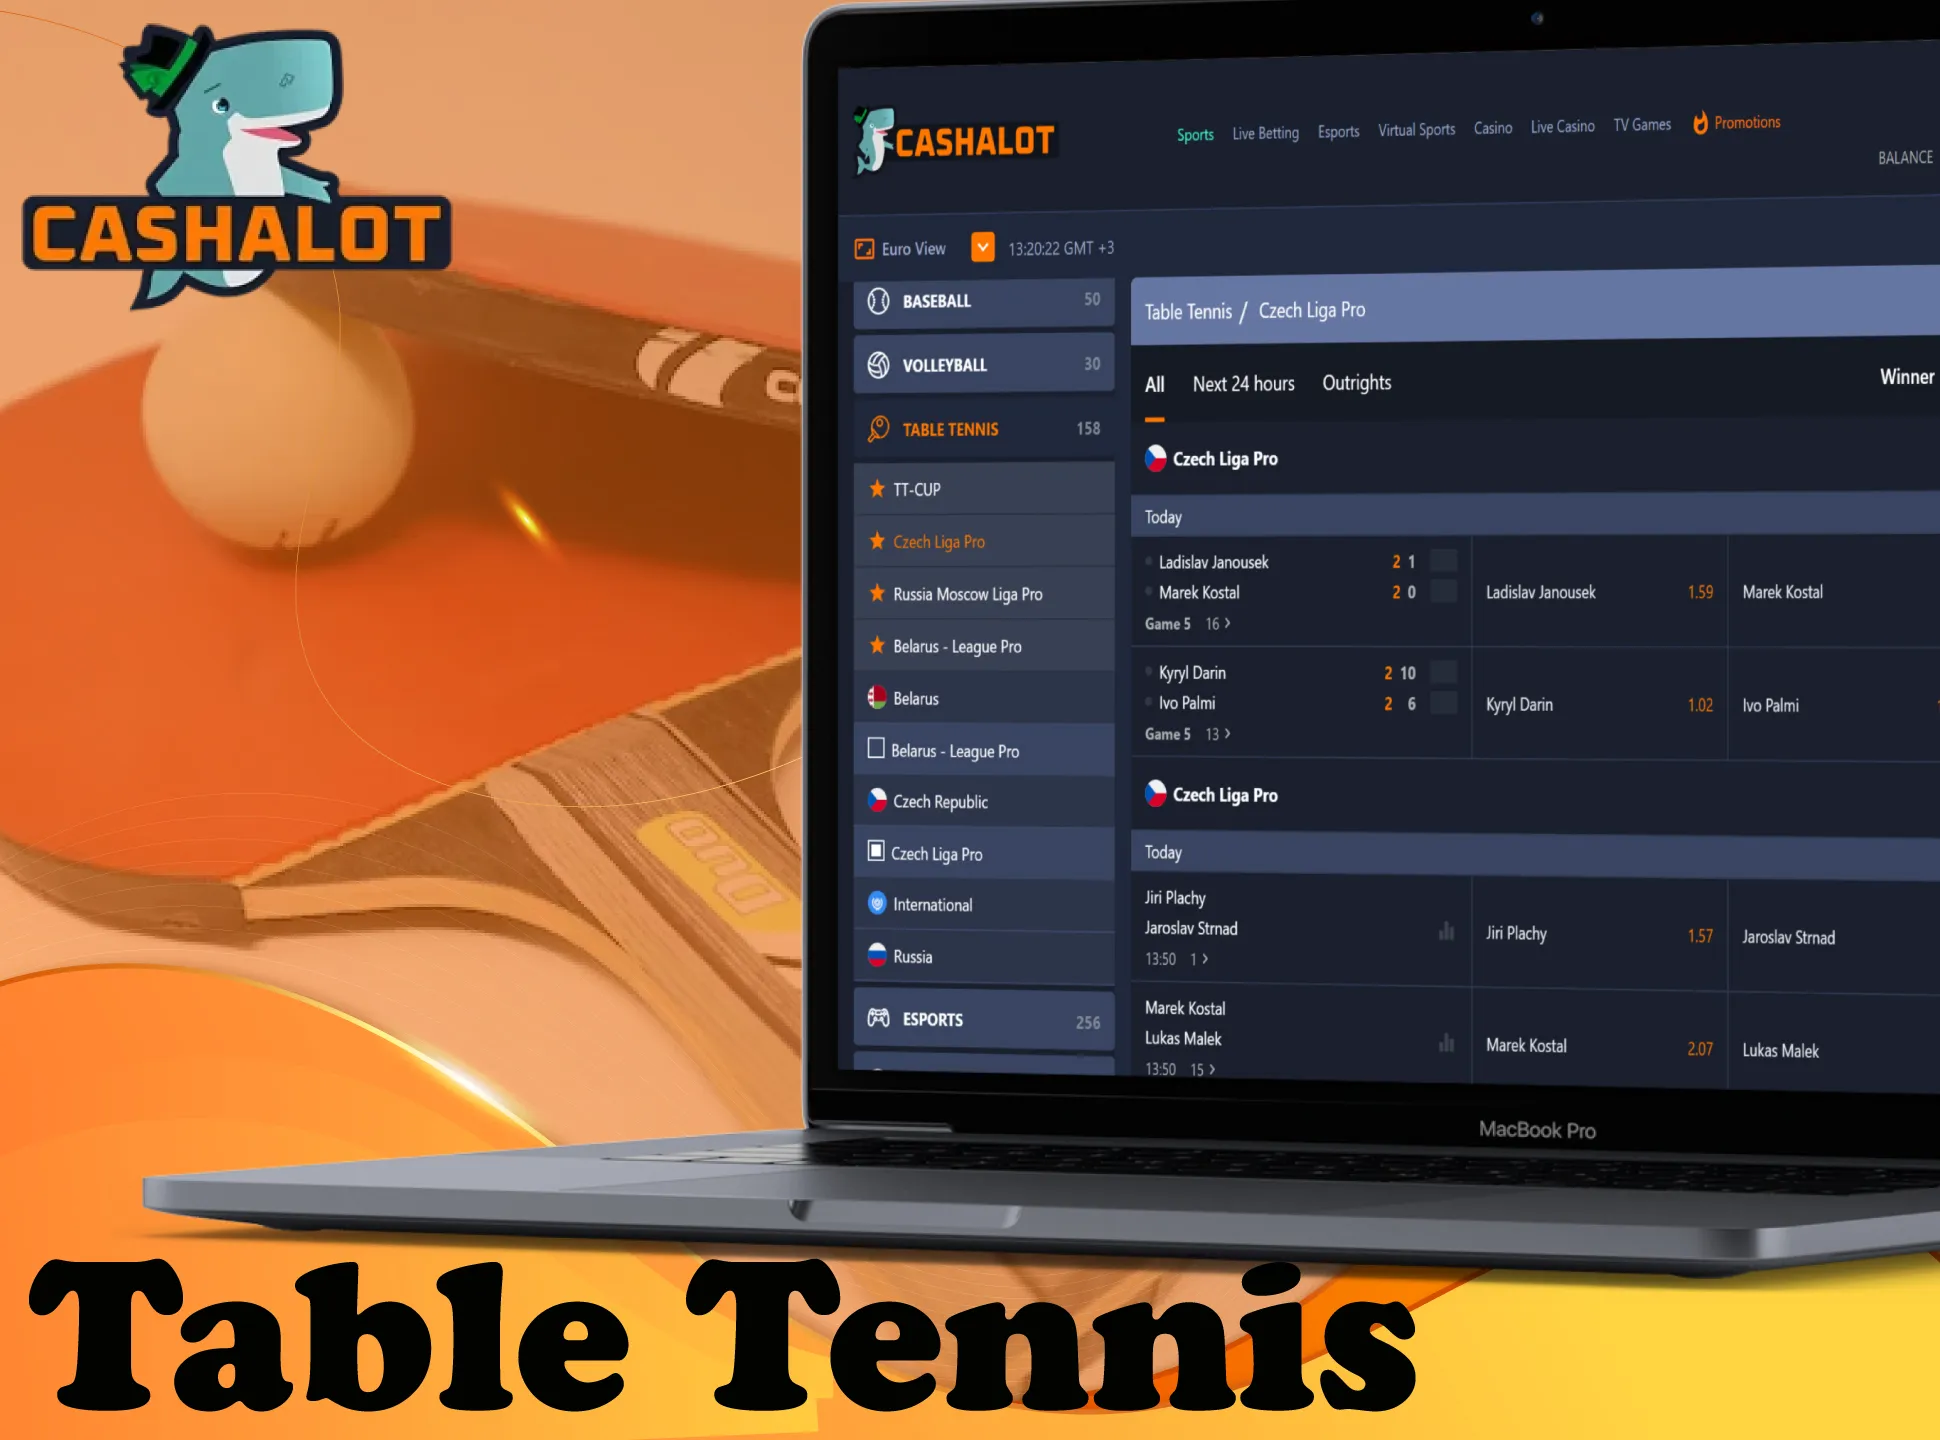 Bet on the best table tennis player and win money at Cashalot.